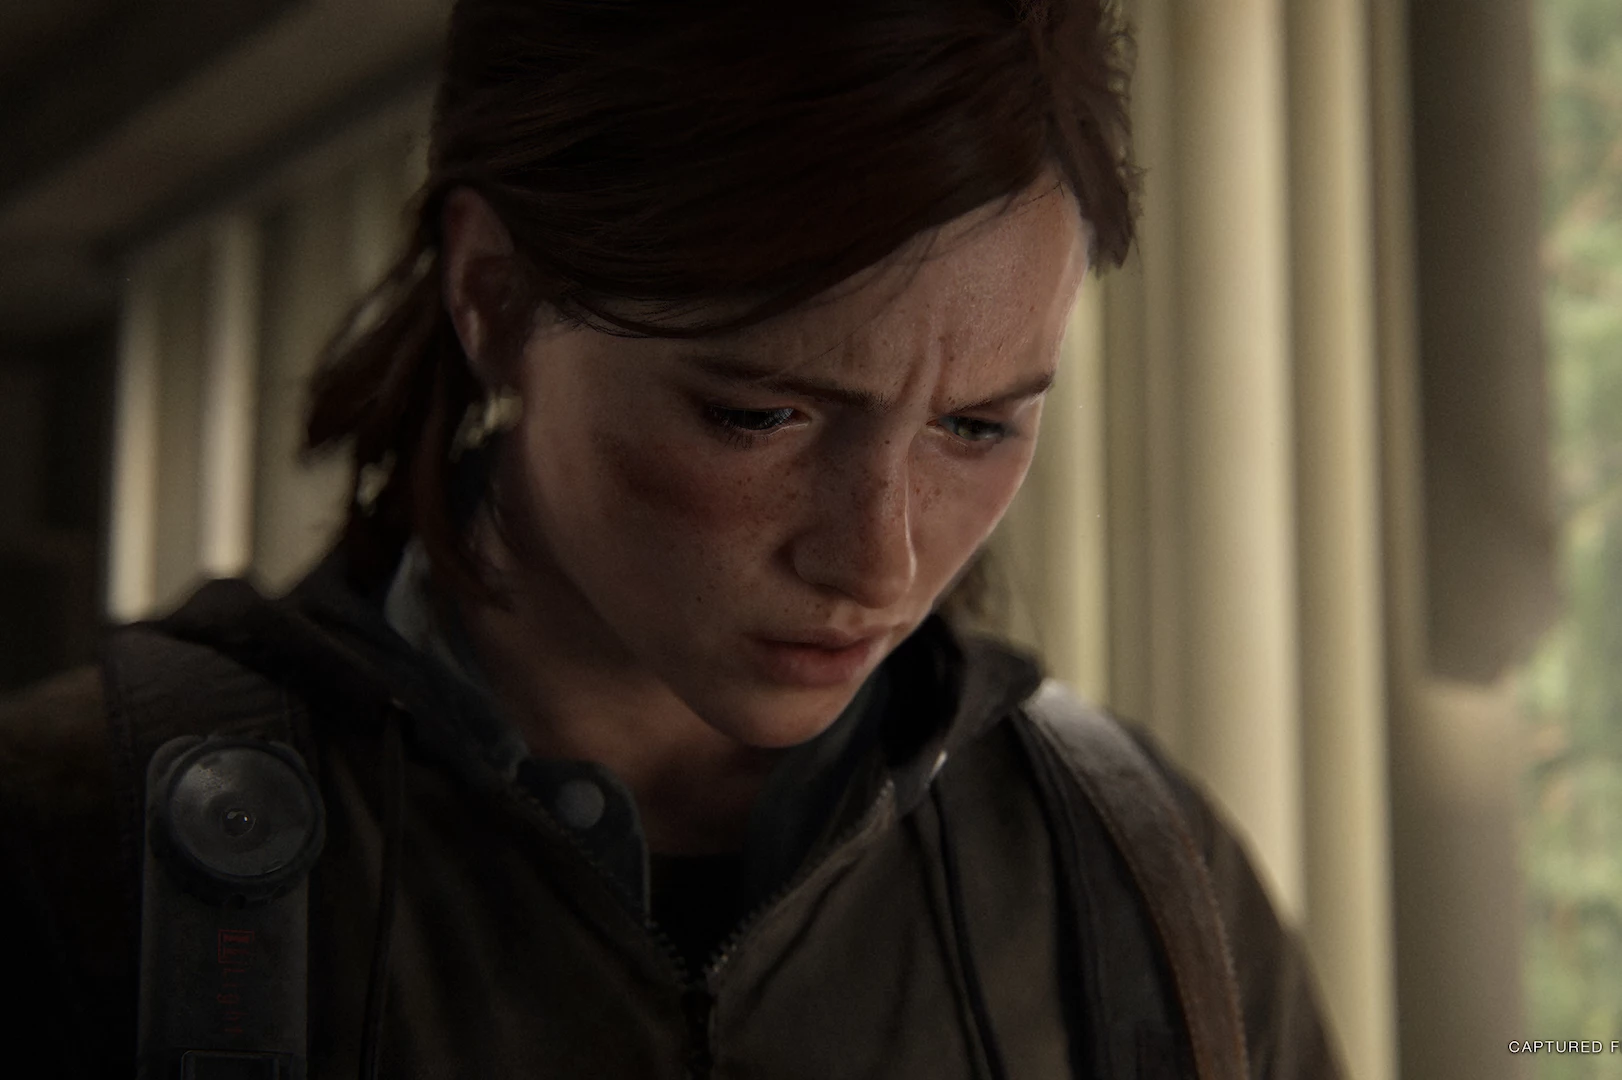 Why The Last of Us Part 2 Is Actually a Story About Love Conquering Hate